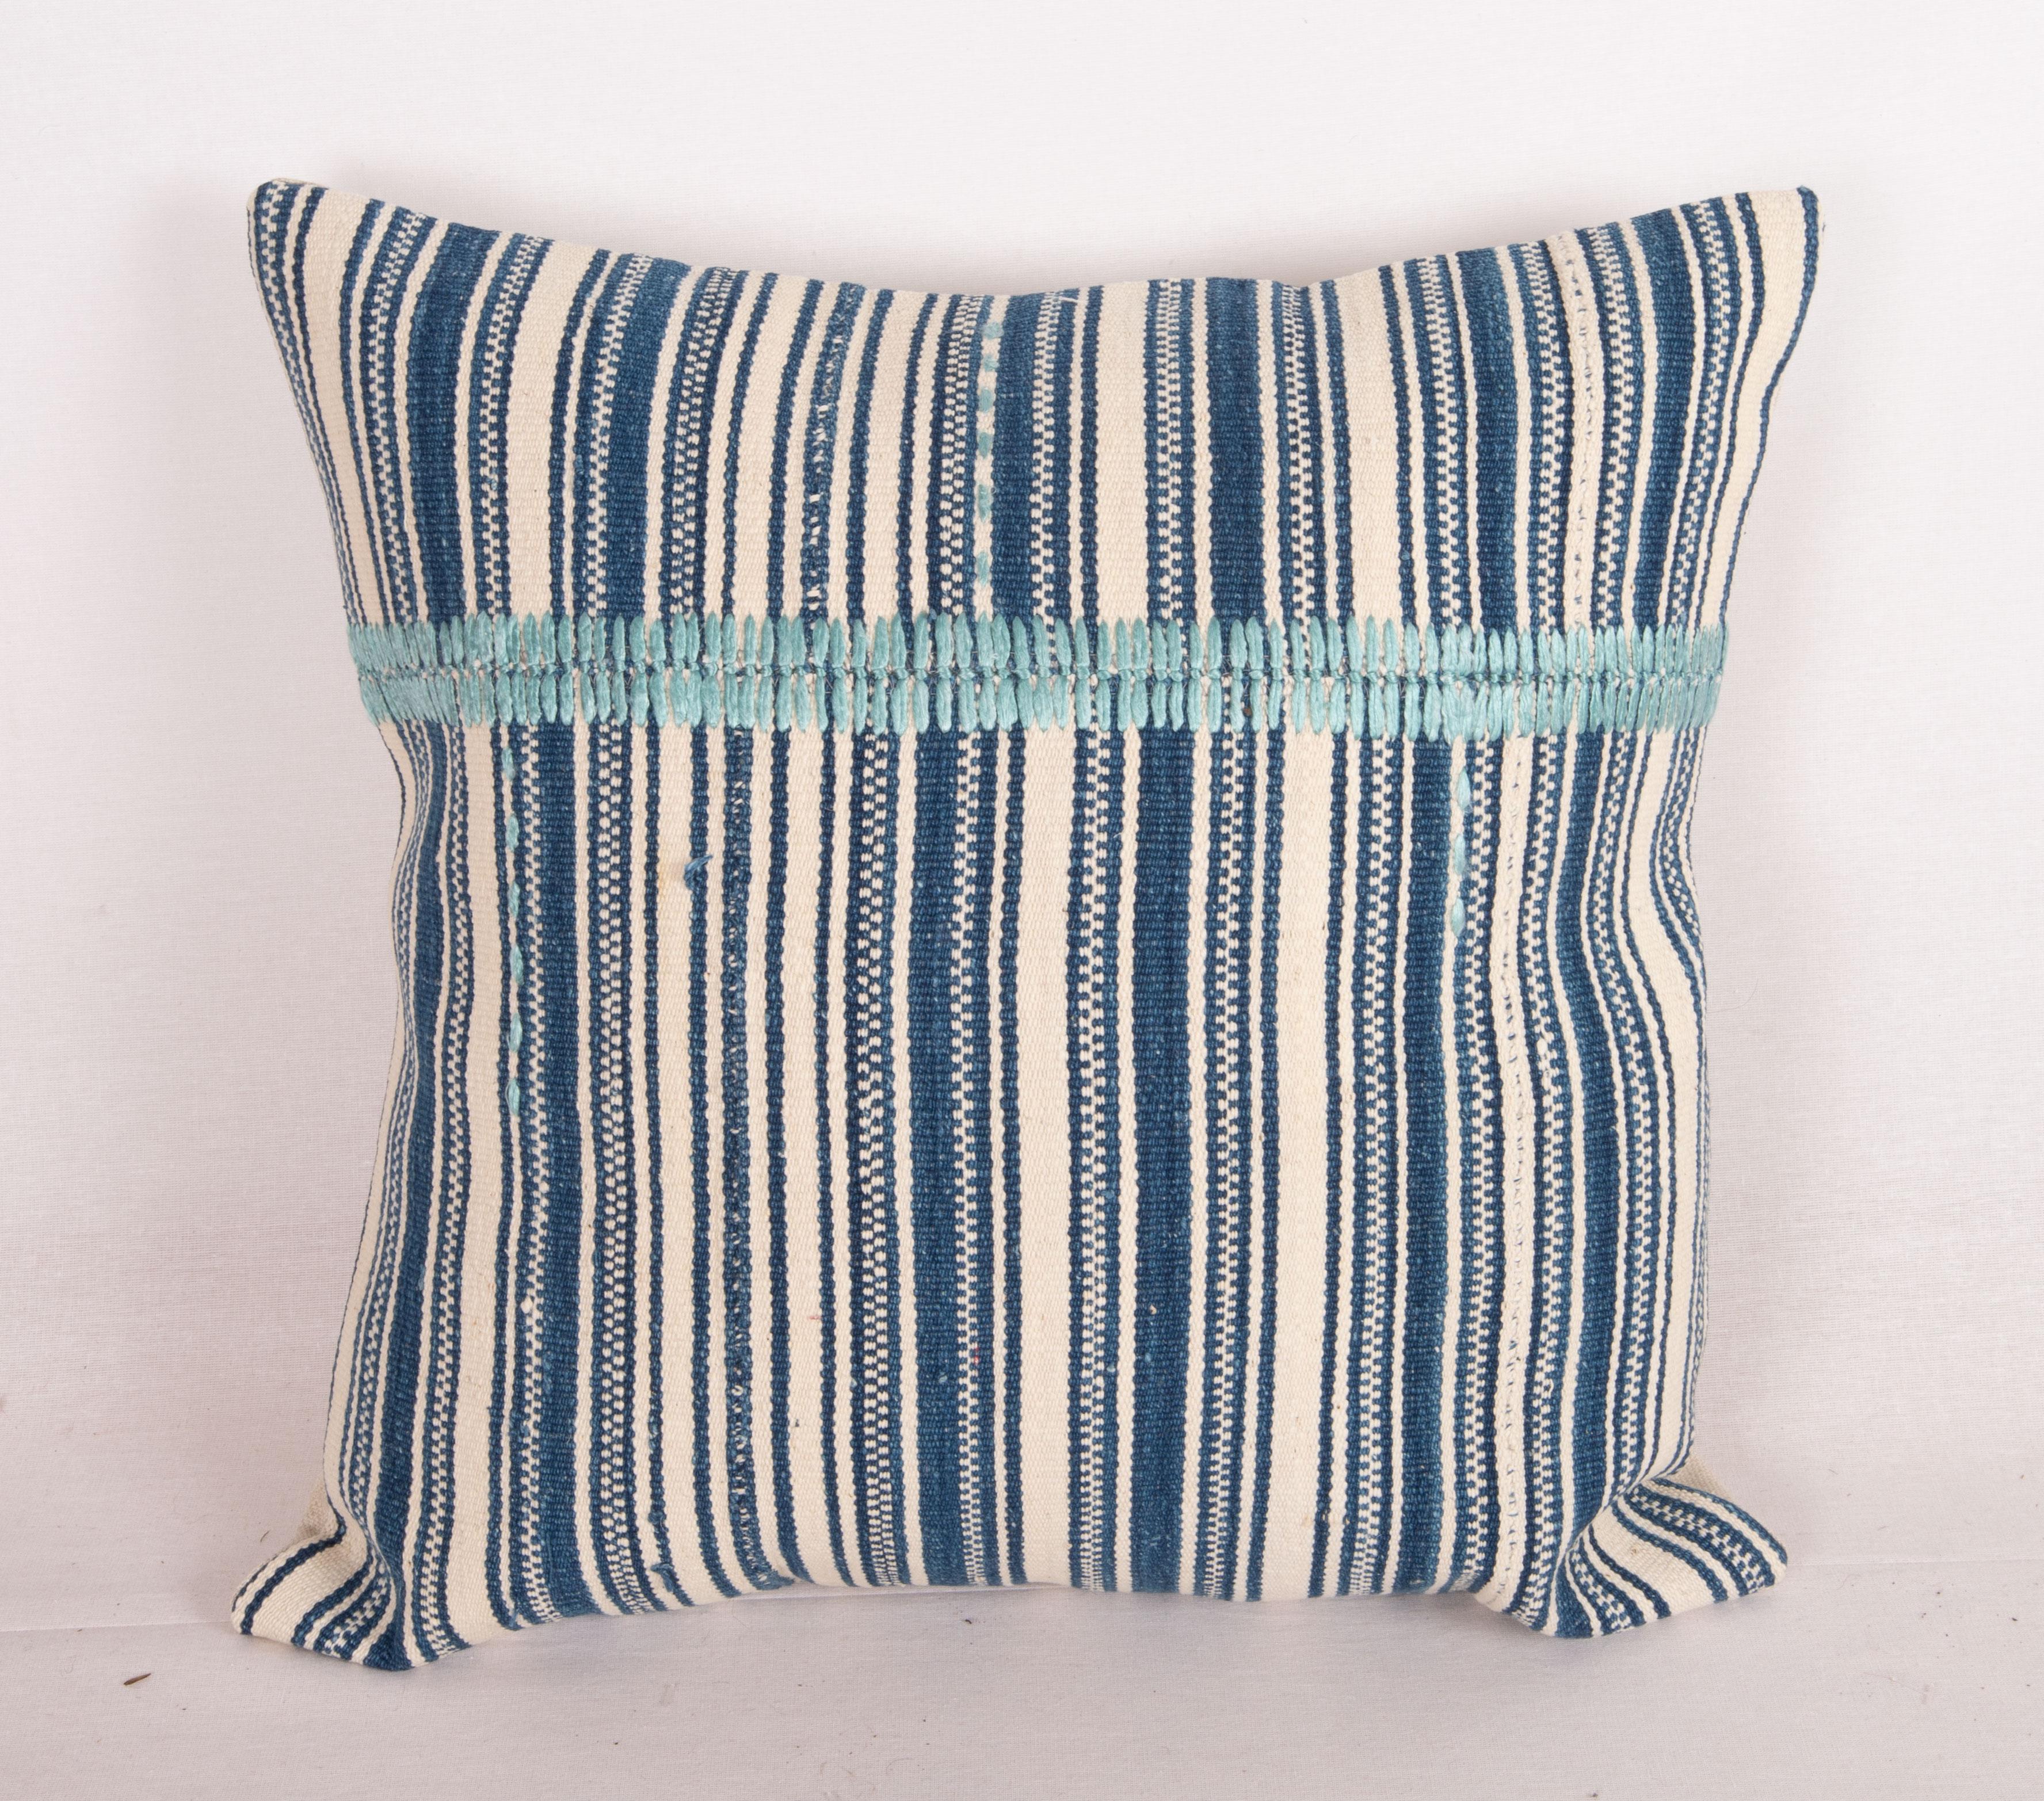 20th Century Indigo Stripped Pillow Cover, Made from a Mid 20th C. Turkish Kilim